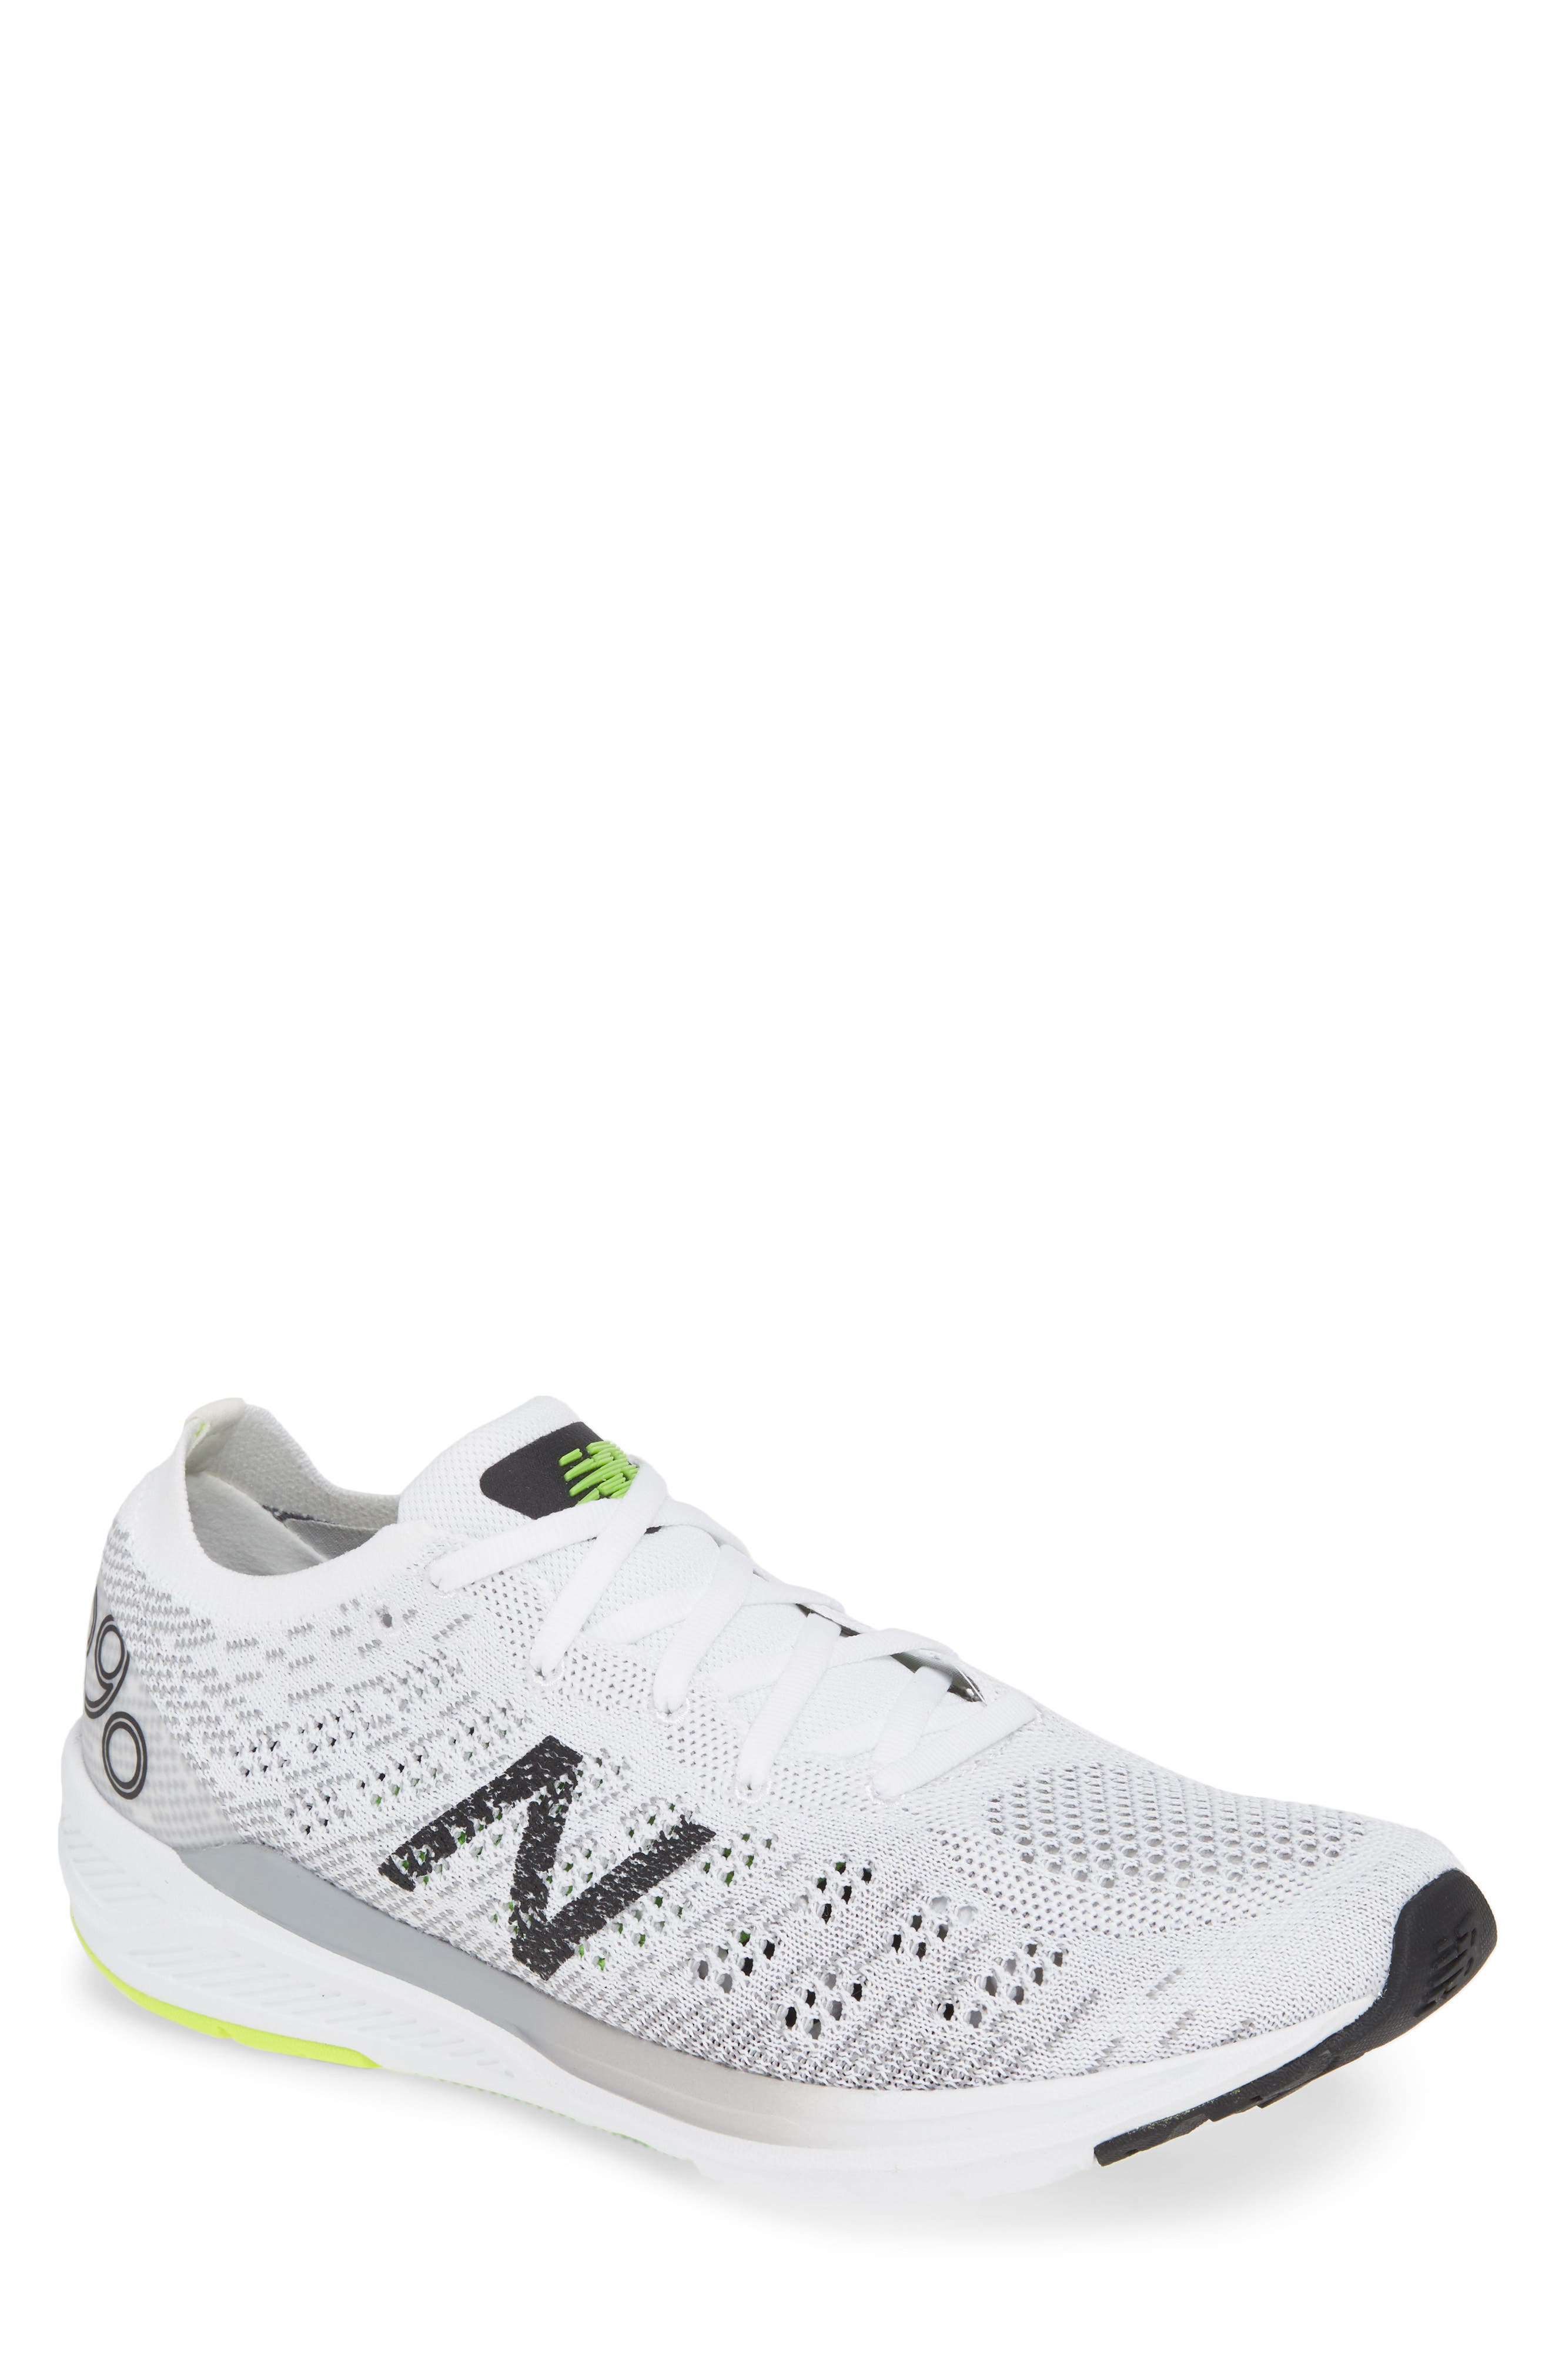 new balance shoes nordstrom